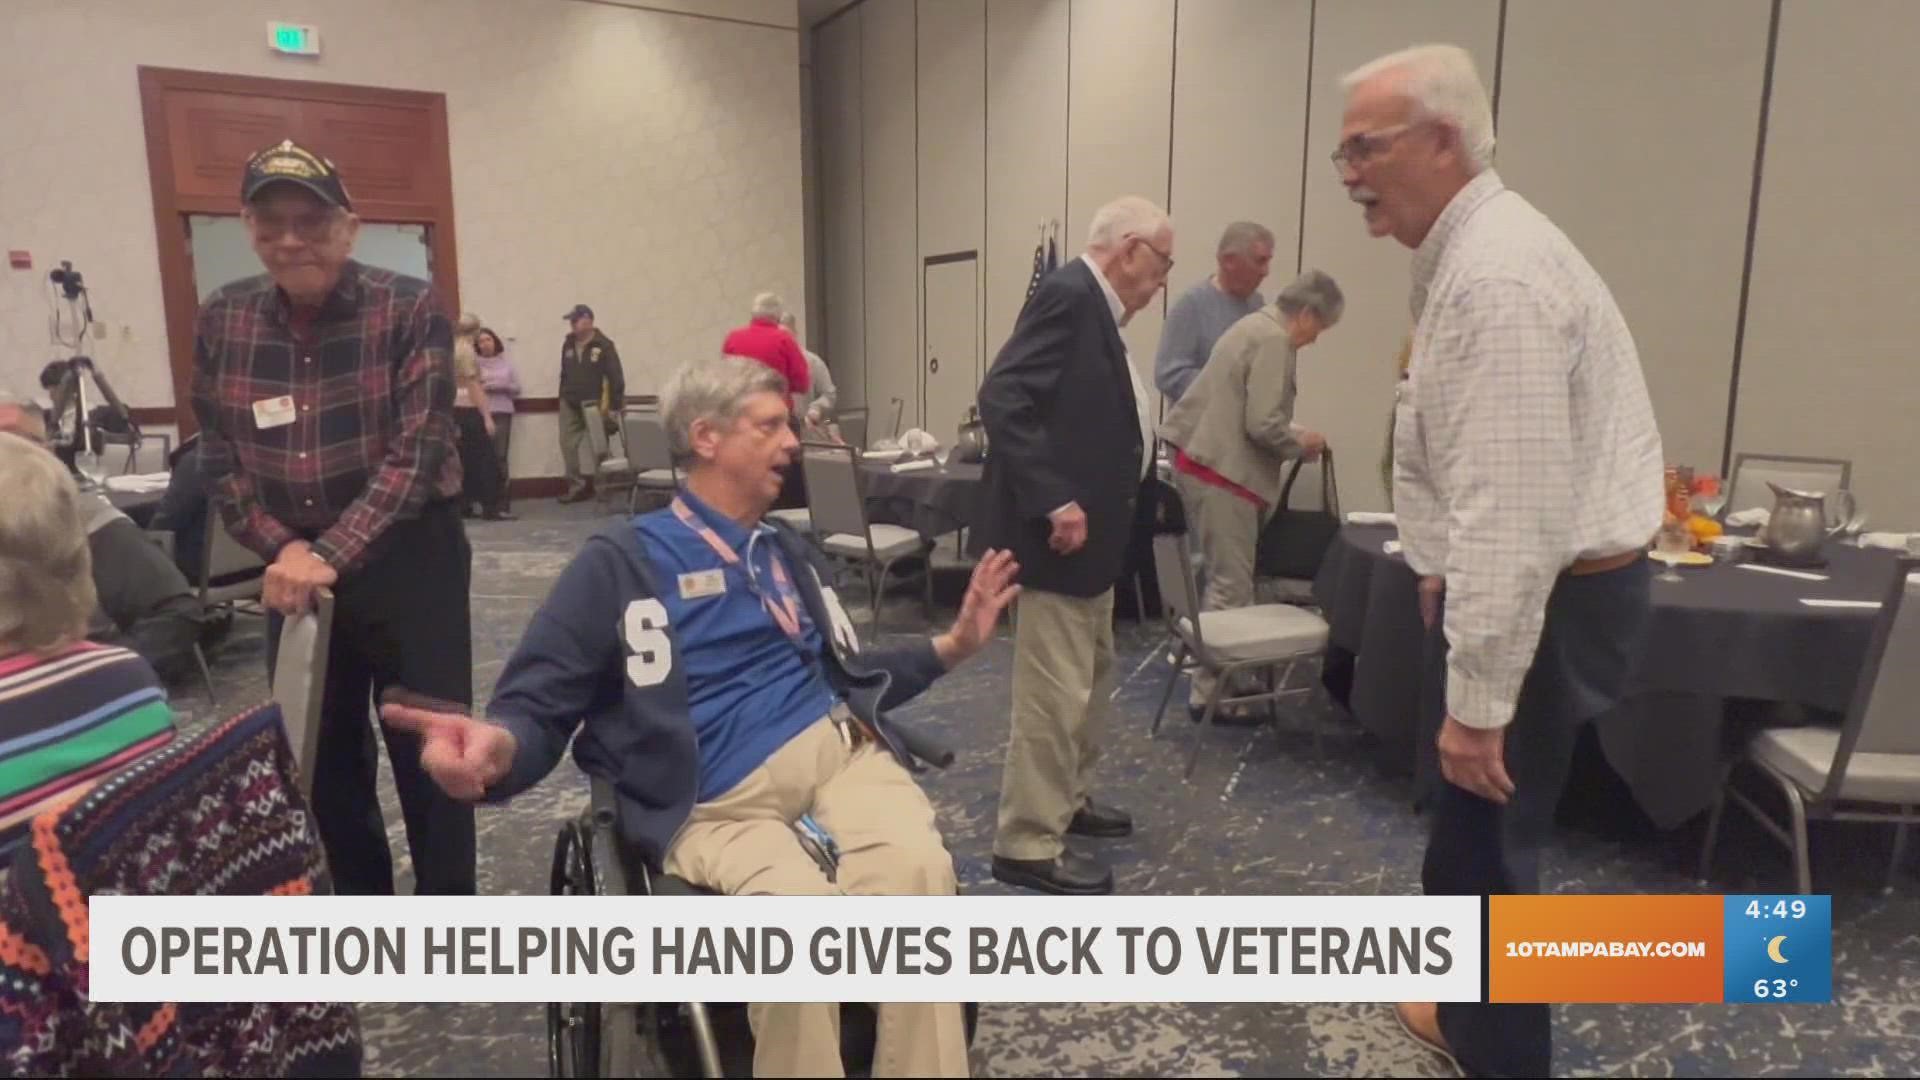 Operation Helping Hand holds monthly dinners to benefit veterans and their families.